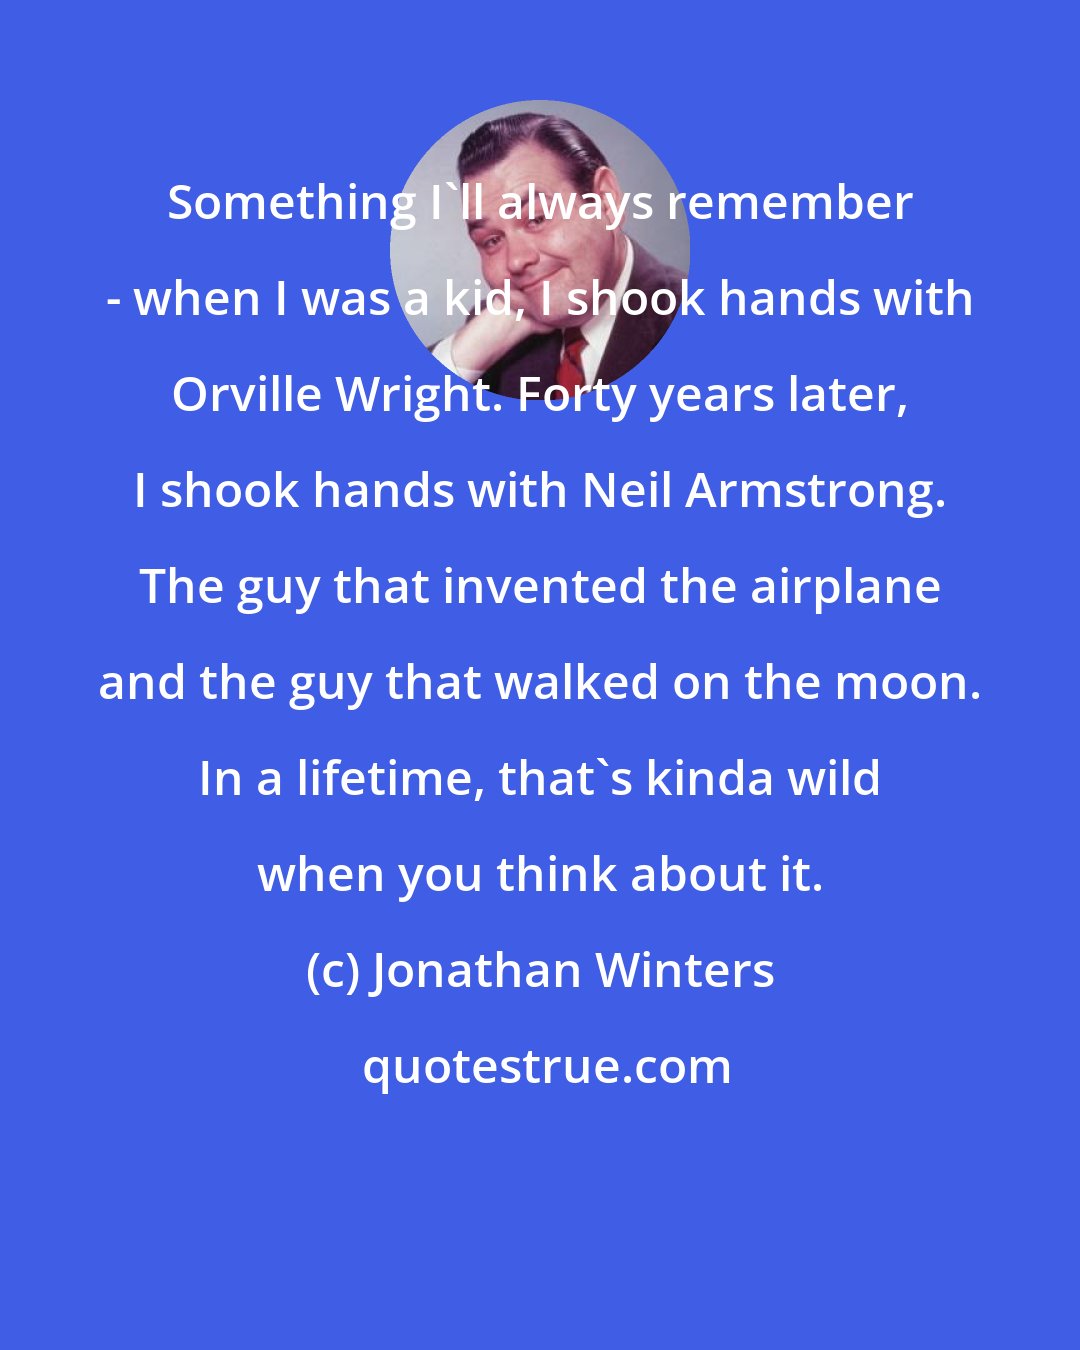 Jonathan Winters: Something I'll always remember - when I was a kid, I shook hands with Orville Wright. Forty years later, I shook hands with Neil Armstrong. The guy that invented the airplane and the guy that walked on the moon. In a lifetime, that's kinda wild when you think about it.